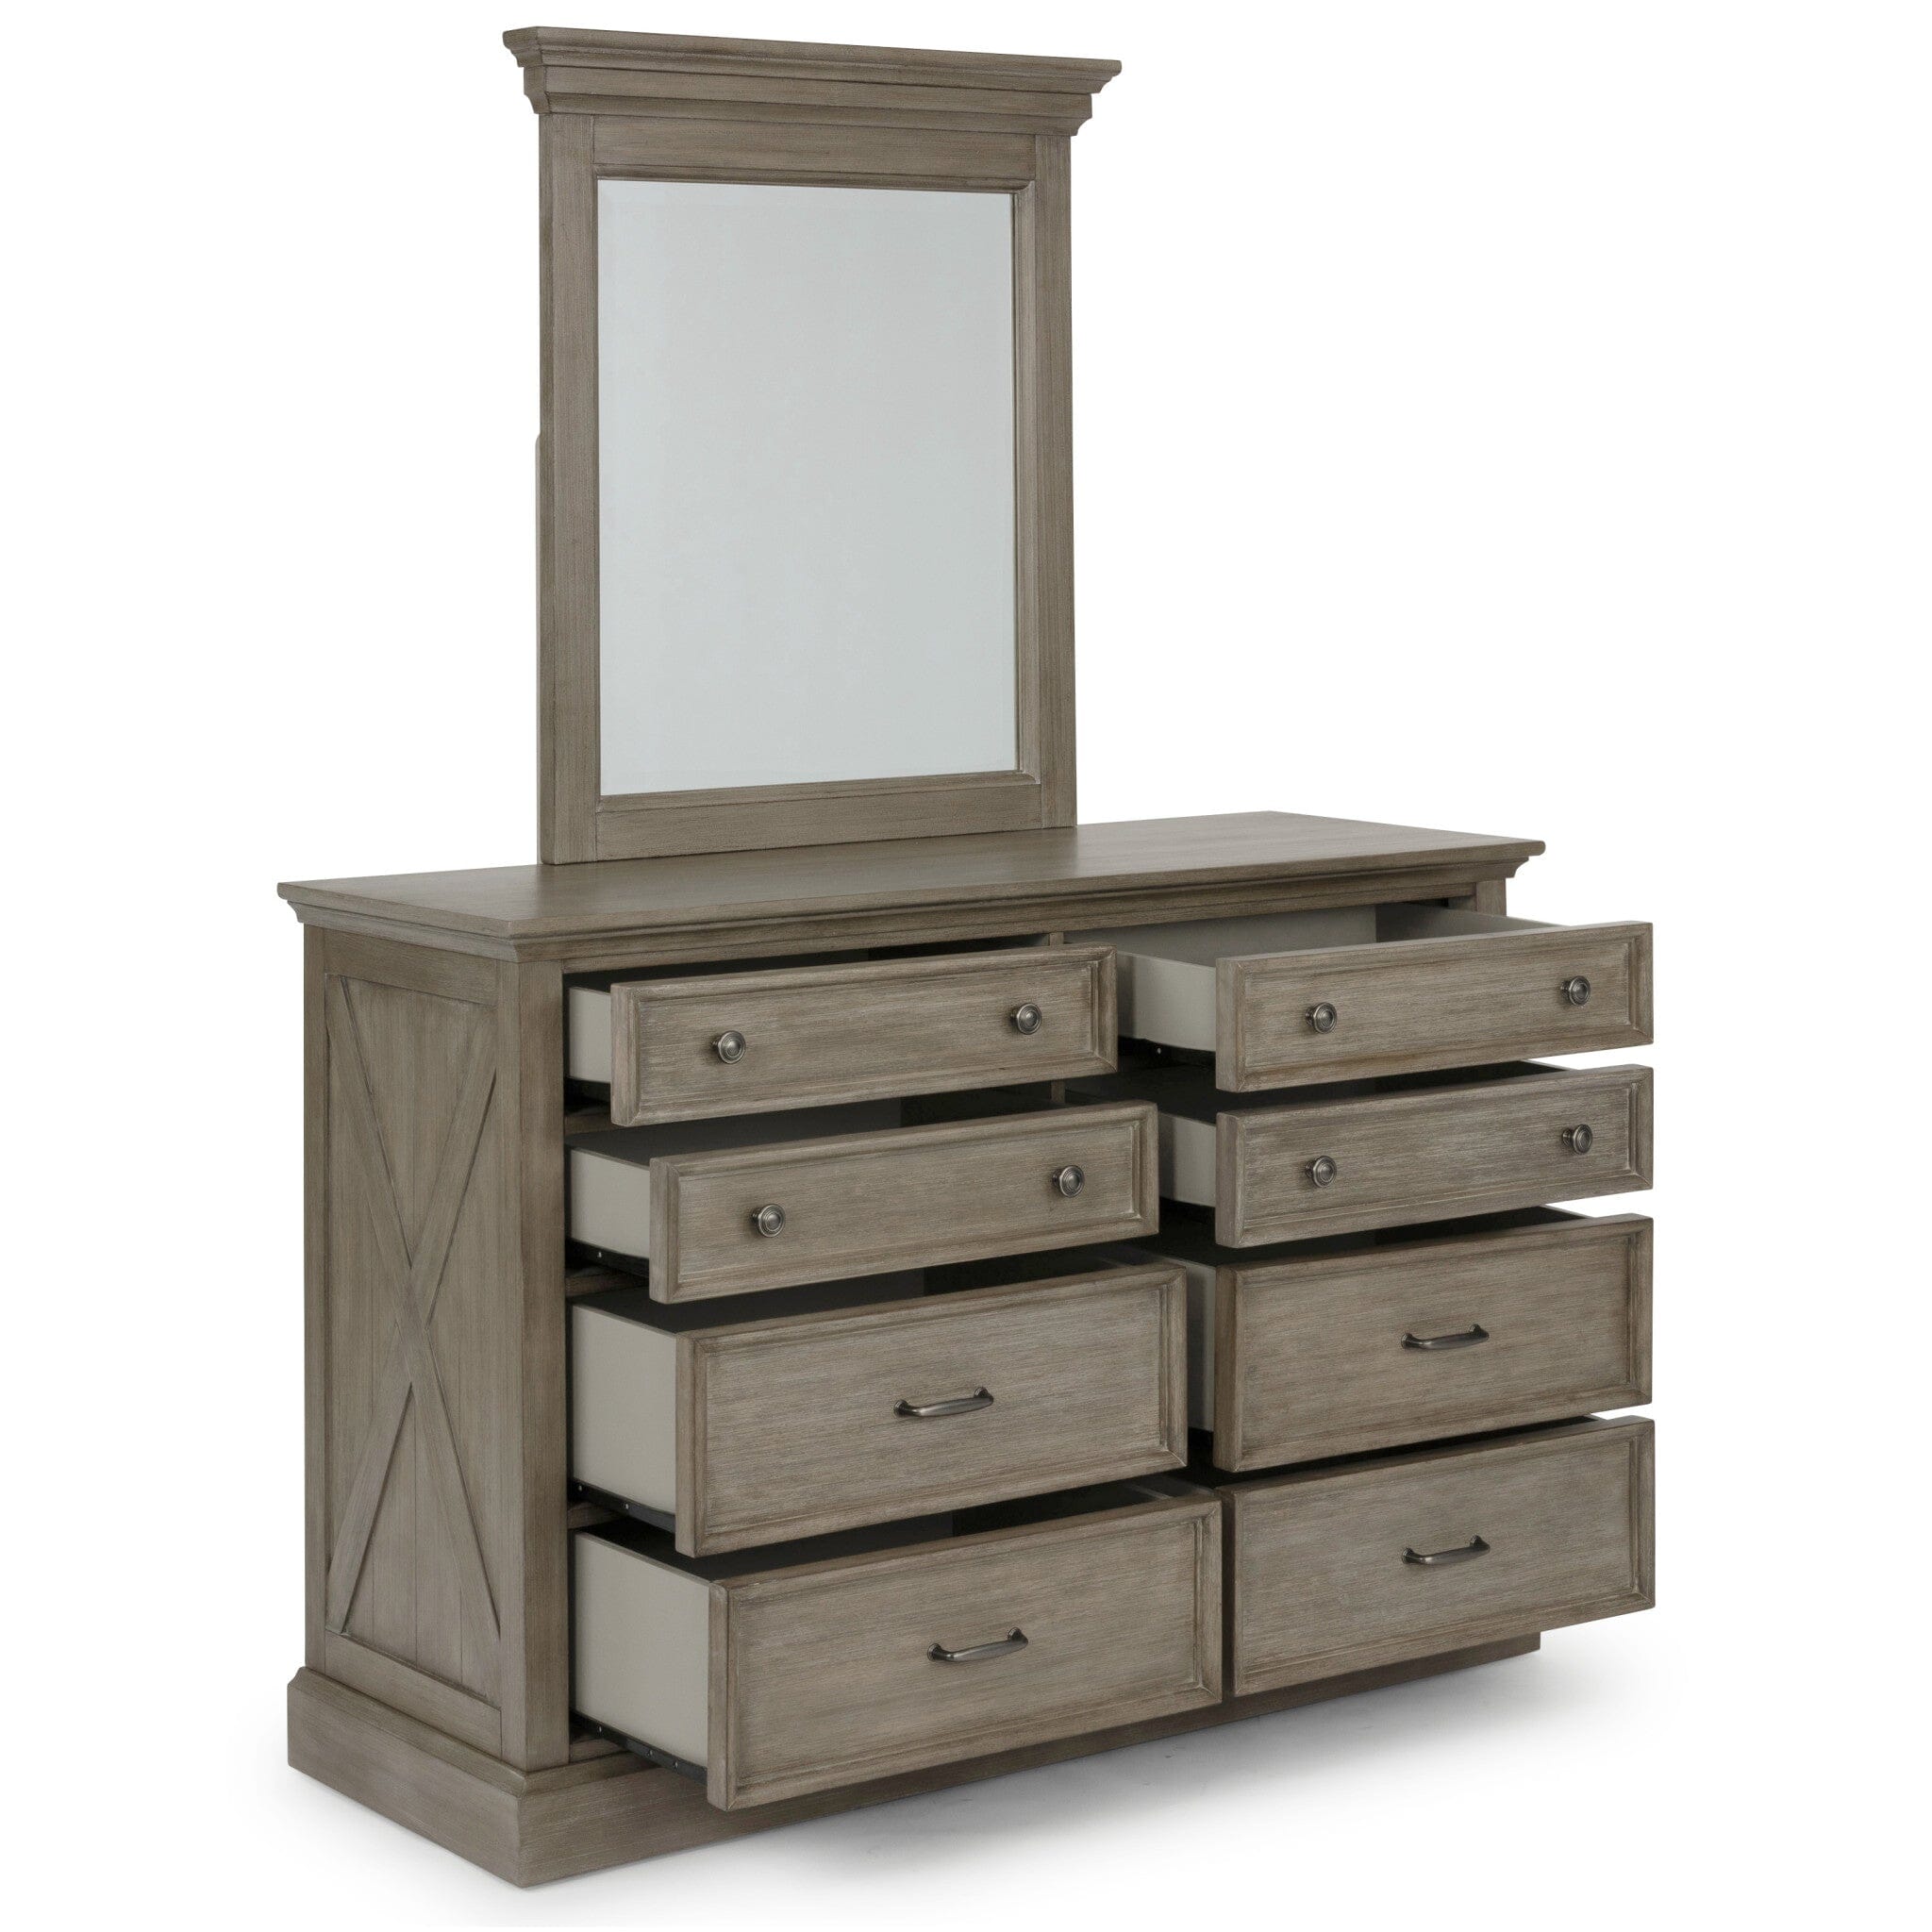 Rustic Farmhouse Dresser with Mirror By Mountain Lodge Dresser Mountain Lodge